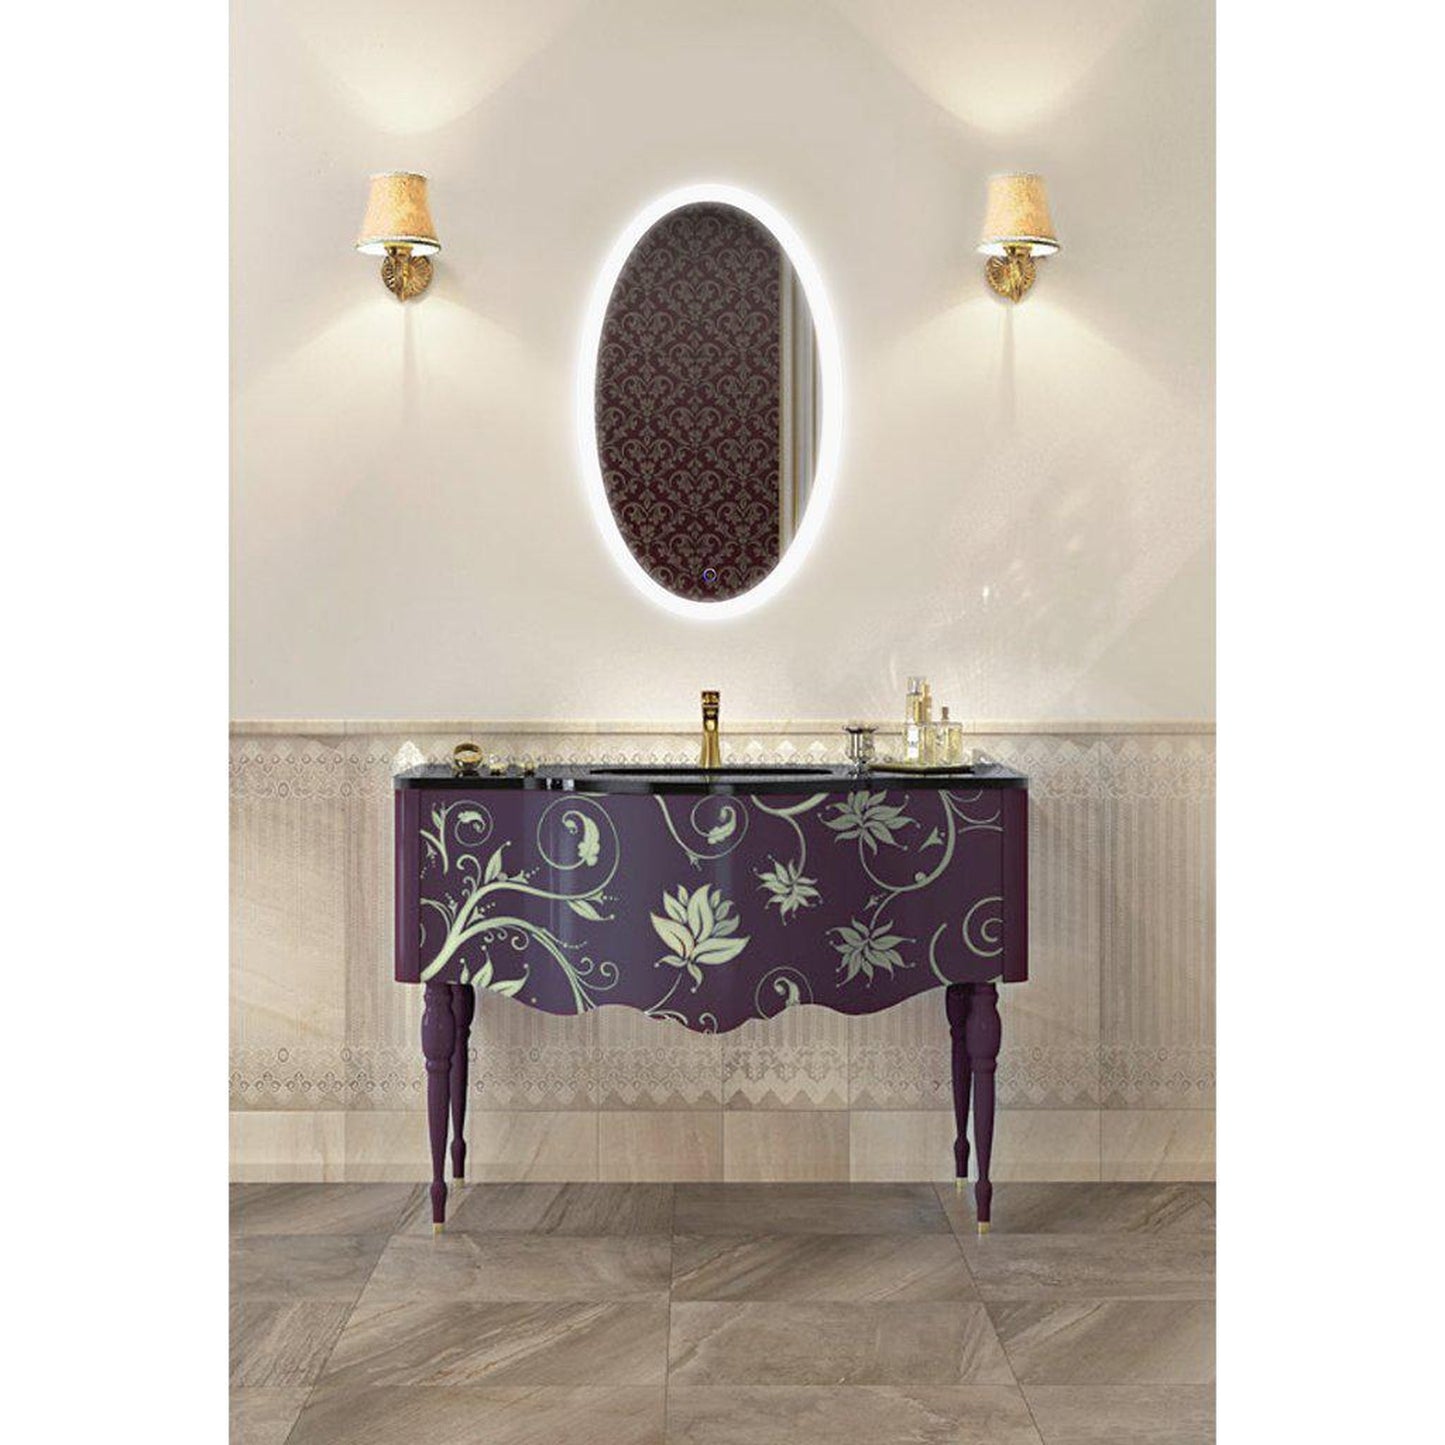 Krugg Reflections Sol 22" x 40" 5000K Oval Wall-Mounted Illuminated Silver Backed LED Mirror With Built-in Defogger and Touch Sensor On/Off Built-in Dimmer